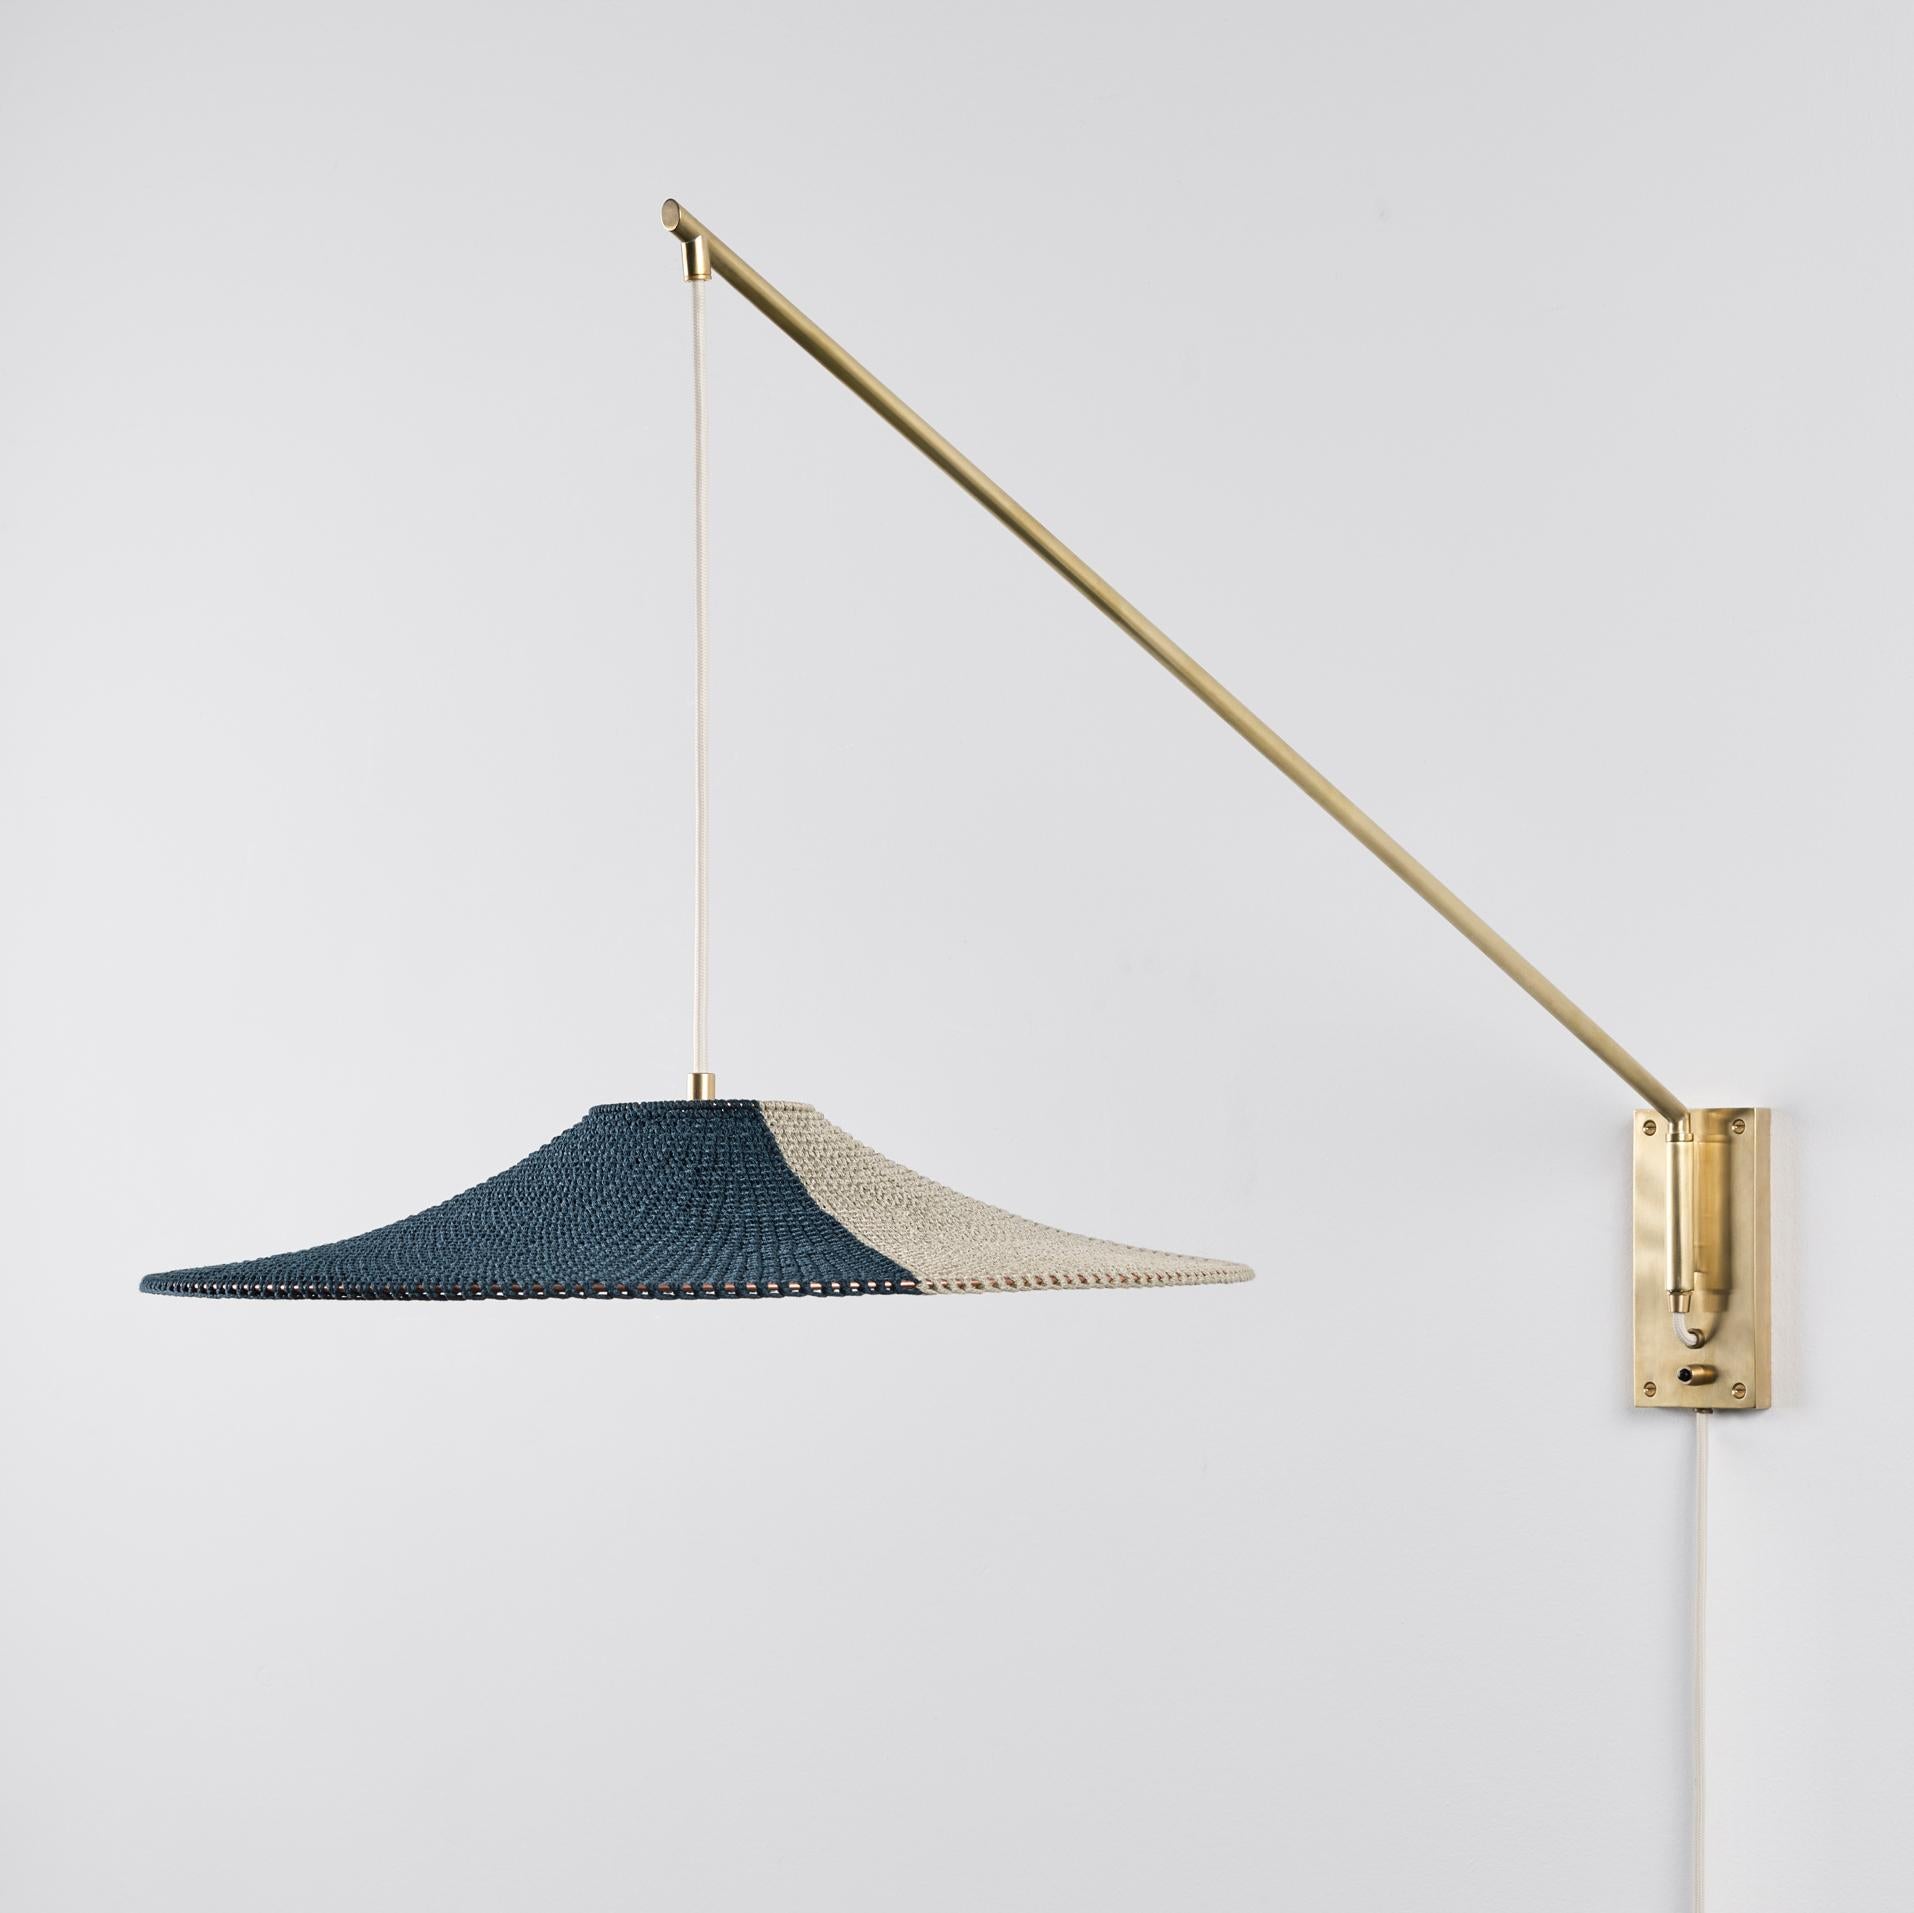 A direct light source, pivoting left and right for easy adjustment of light focus. SS01 Wall Arm Long is perfect for a social environment.

Our pendants and lighting designs are made using 100% Egyptian mercerised cotton cord. The yarn is first spun